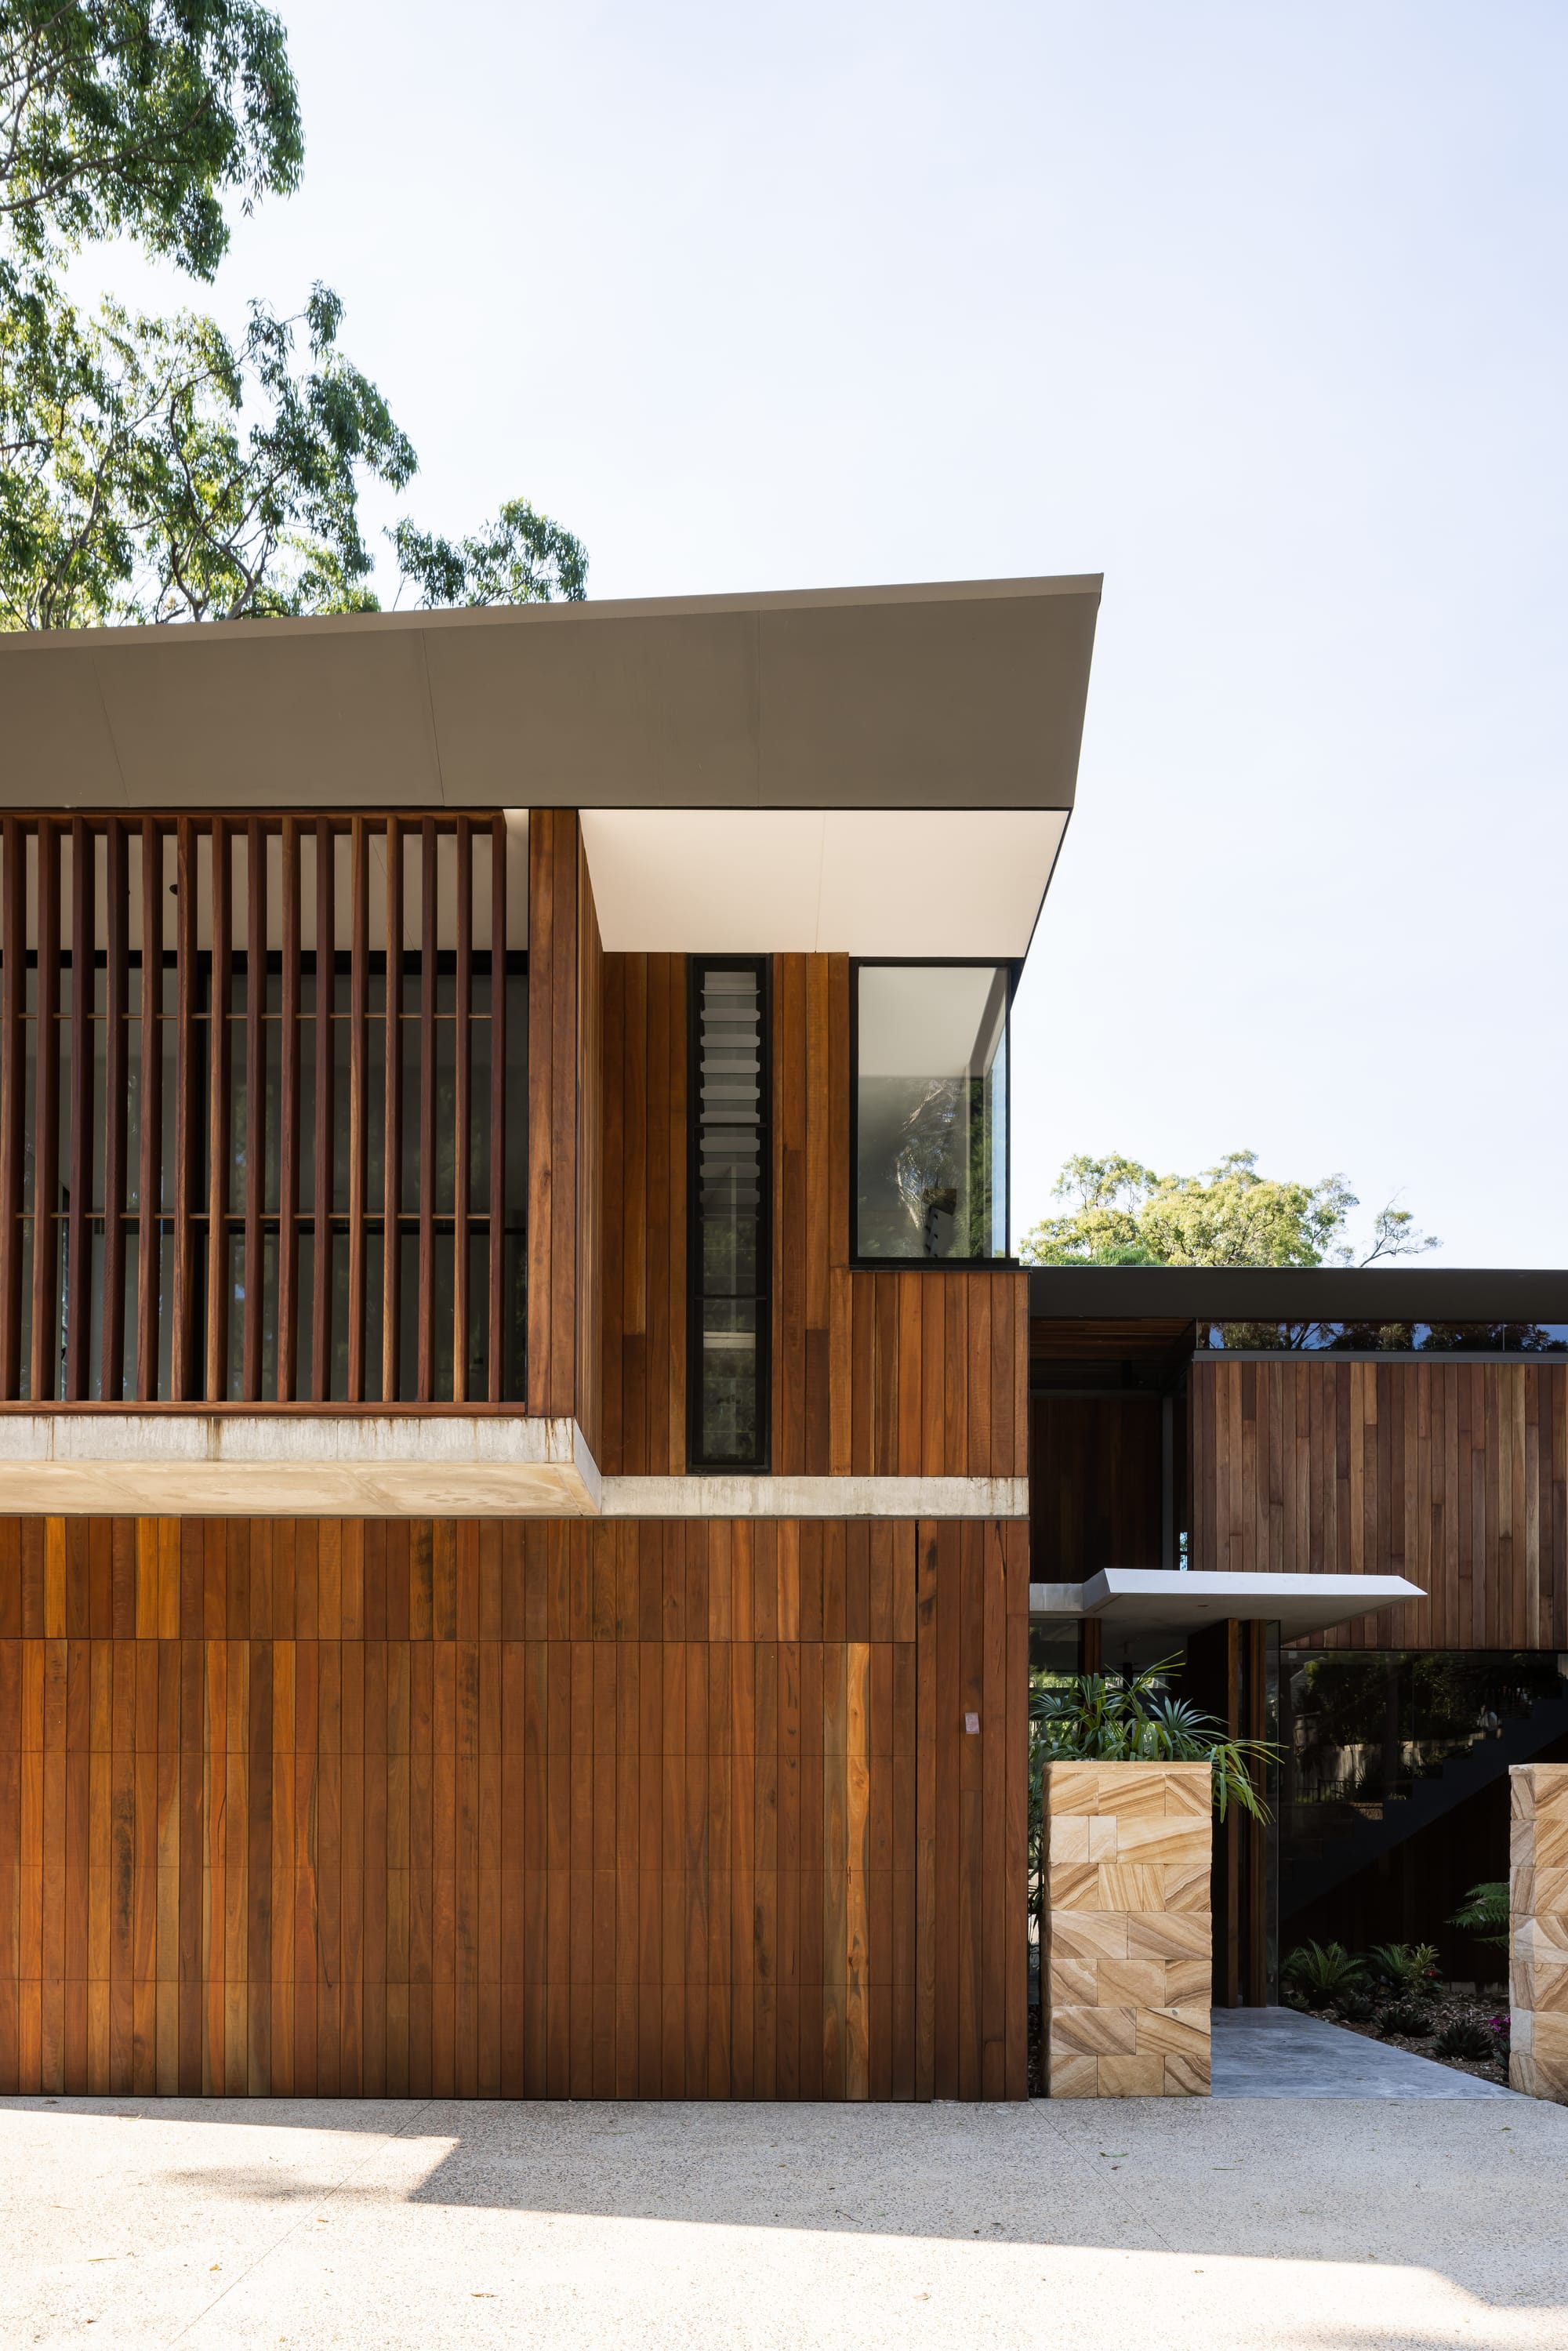 Mortlock Timbers Series: Fox Valley House. Photography by Simon Whitbread. Timber clad facade of double storey residential home. Angular roof, stone pillars by front entrance.